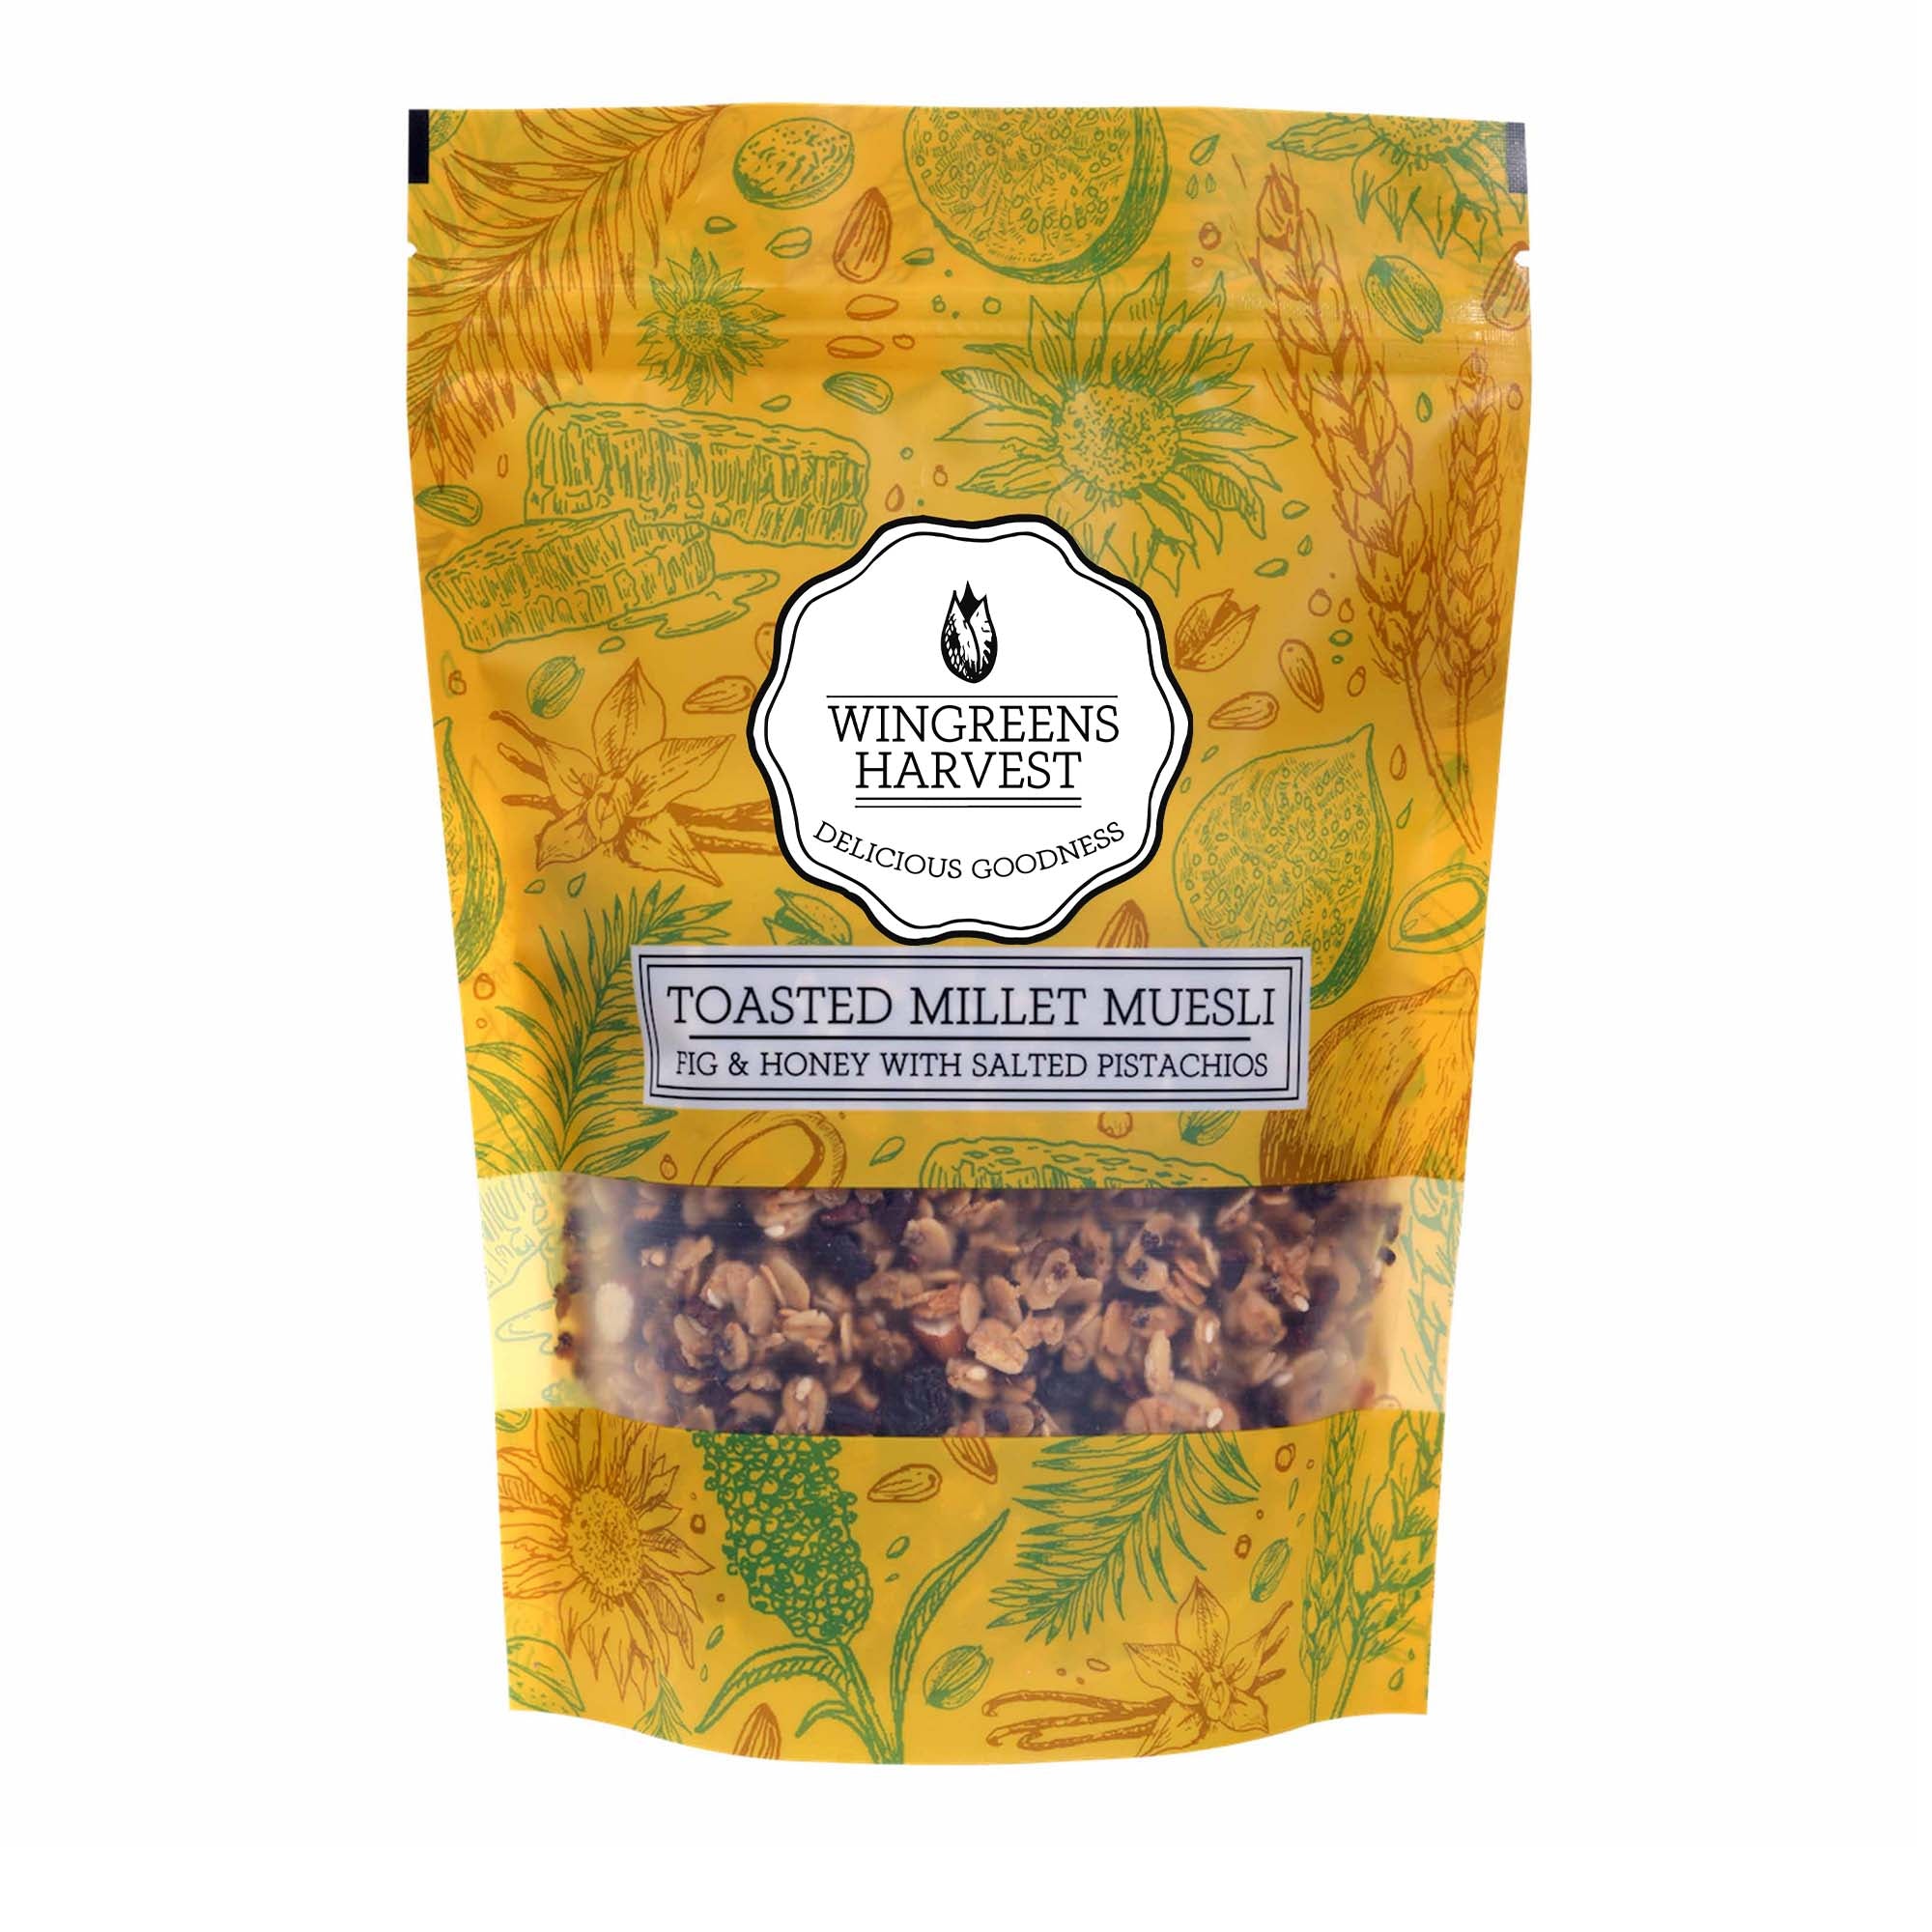 Toasted Millet Muesli - Assorted Variety Pack 4 x 250 g